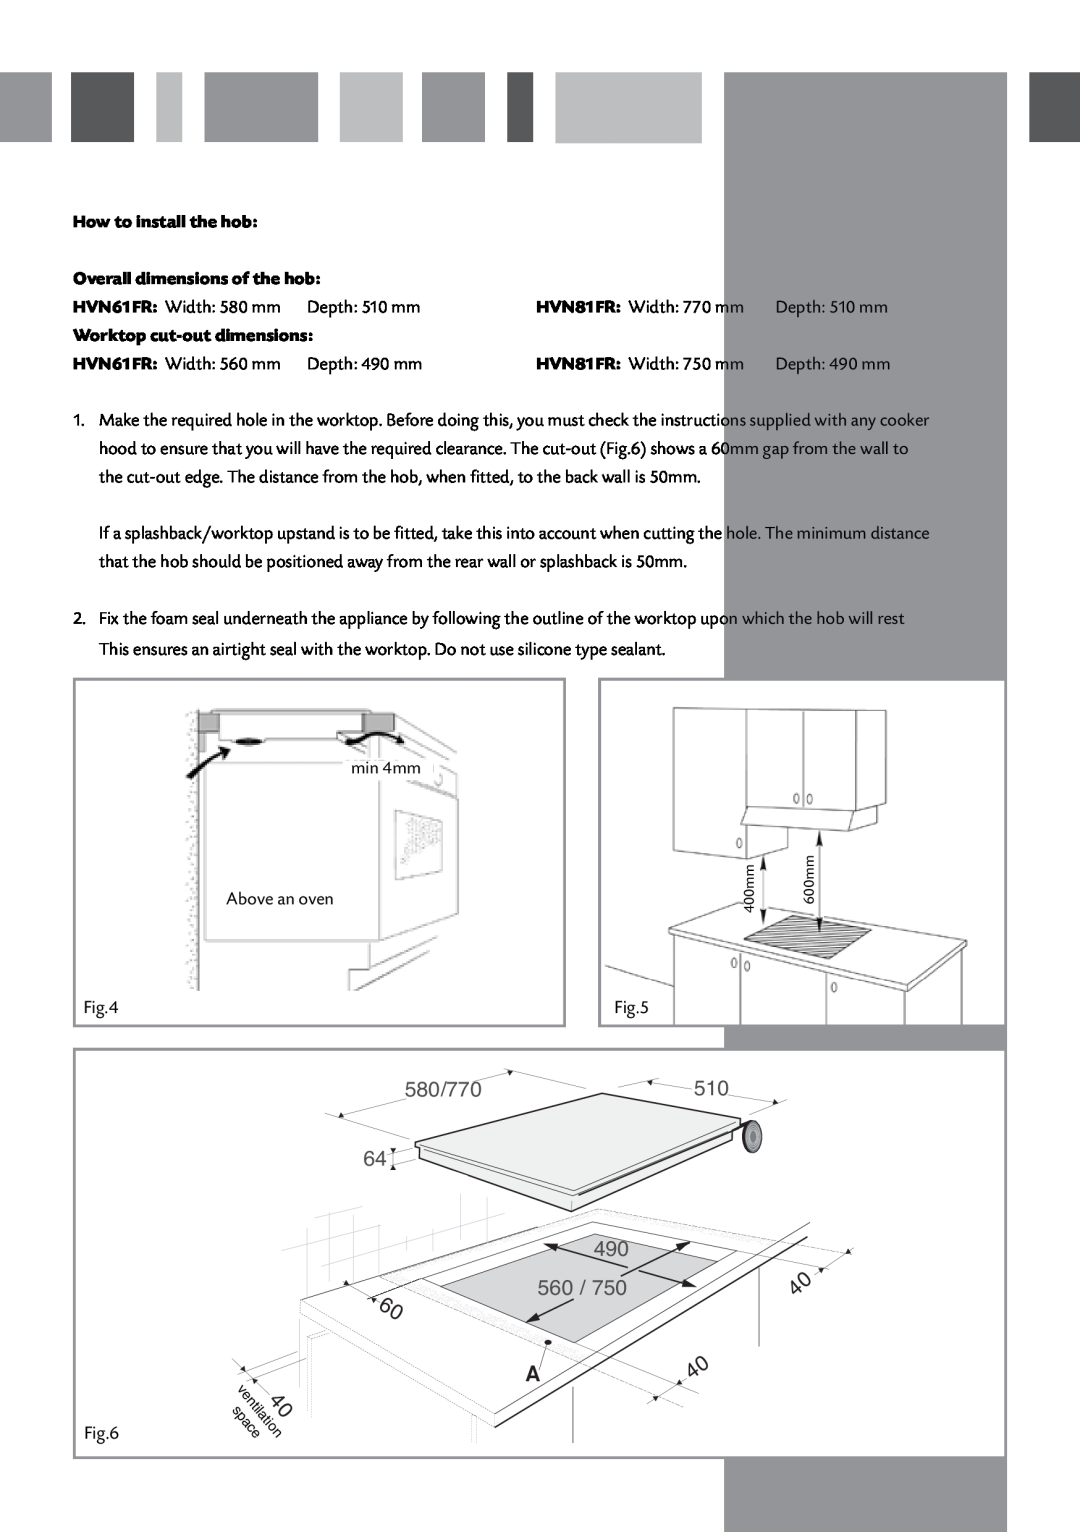 CDA HVN61/81 manual How to install the hob, Overall dimensions of the hob, HVN61FR Width 580 mm, Depth 510 mm, Depth 490 mm 